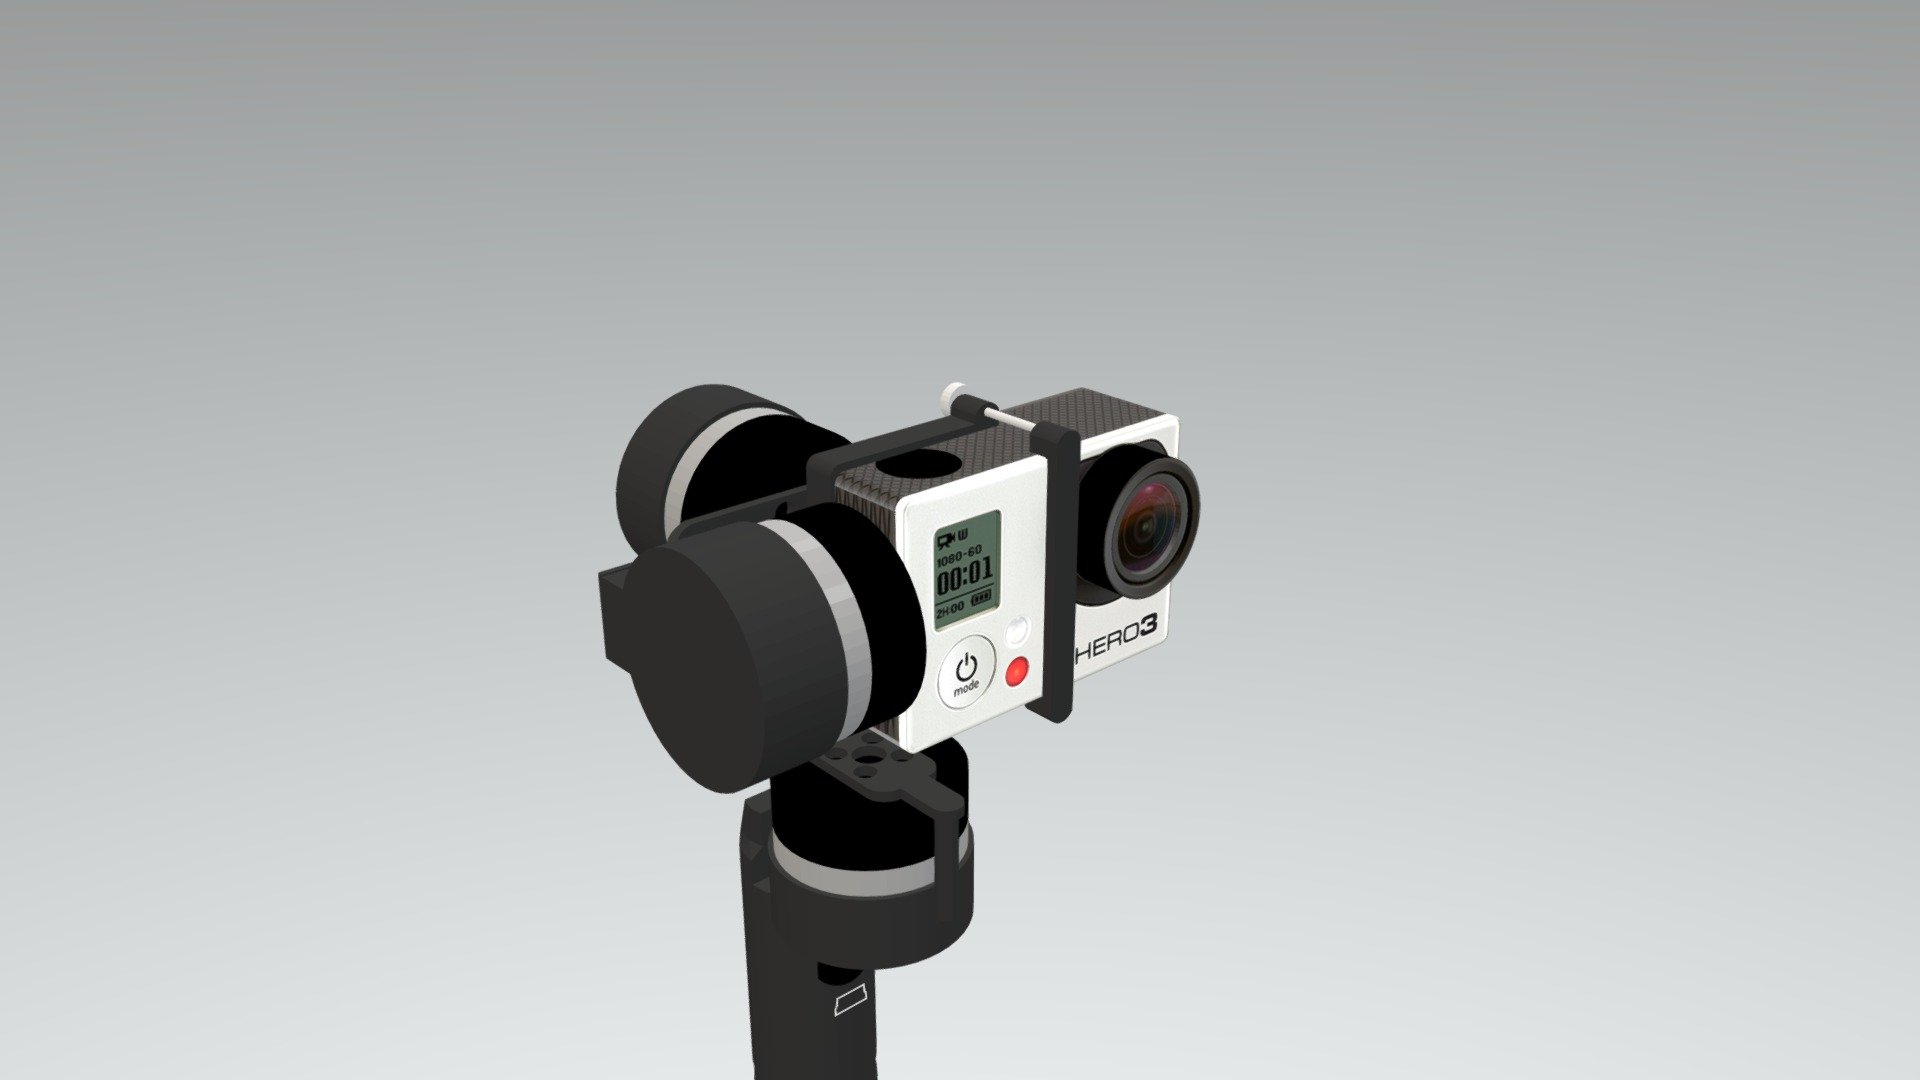 CineMount Gimbals are easy to operate, they help you to record beautiful stable moving shots with ease. 

When it comes to using your smartphone, GoPro, compact camera or DSLR to shoot videos, you definitely need a handheld steady gimbal to shoot shake free steady videos. CineMount Gimbals help you to make your footage stand out.

http://www.cinemountsystems.com - Cinemount - 3 Axis Handheld Gimbals - - 3D model by cinemount 3d model